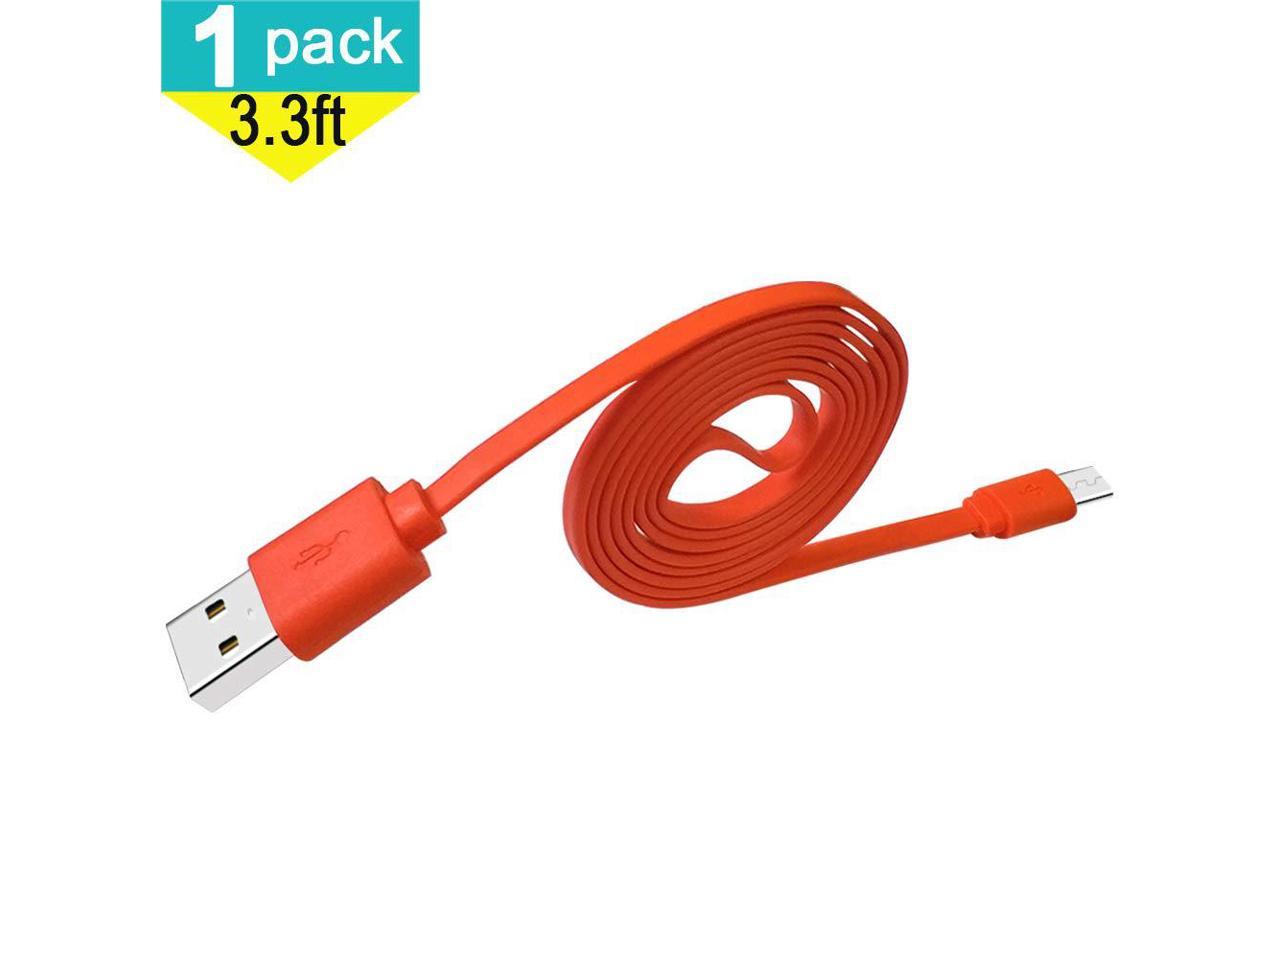 USB Charging Cable for JBL Flip 3 Flip 4 Charge 3 Wireless Speaker Charger Lead